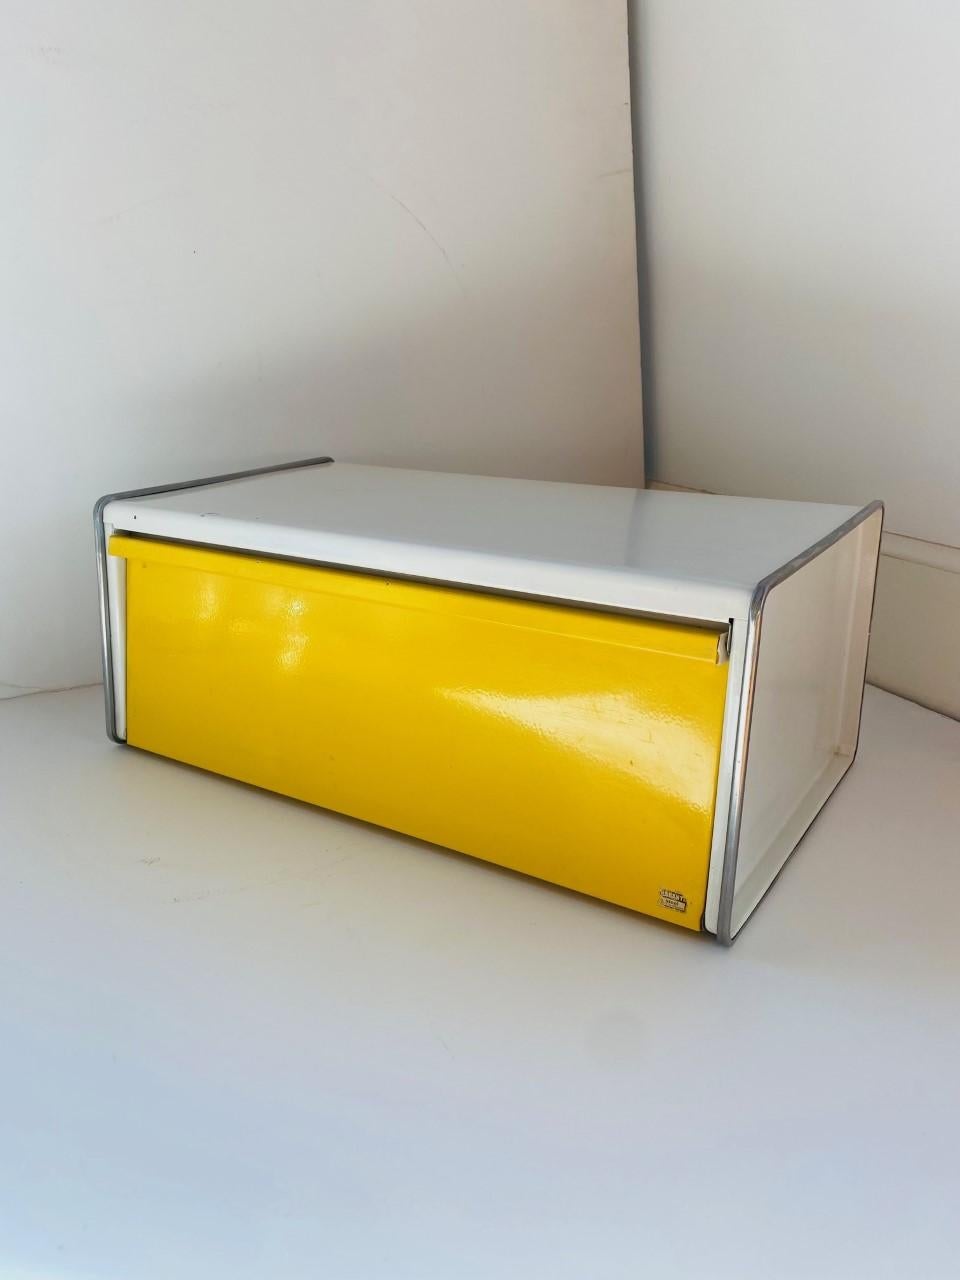 Vintage Brabantia metal bread box, white bread bin with a yellow lid., midcentury design from Holland from the 1970s. This bread box will be a real icon for your retro kitchen or décor or a very genius storage option. Groovy, light and